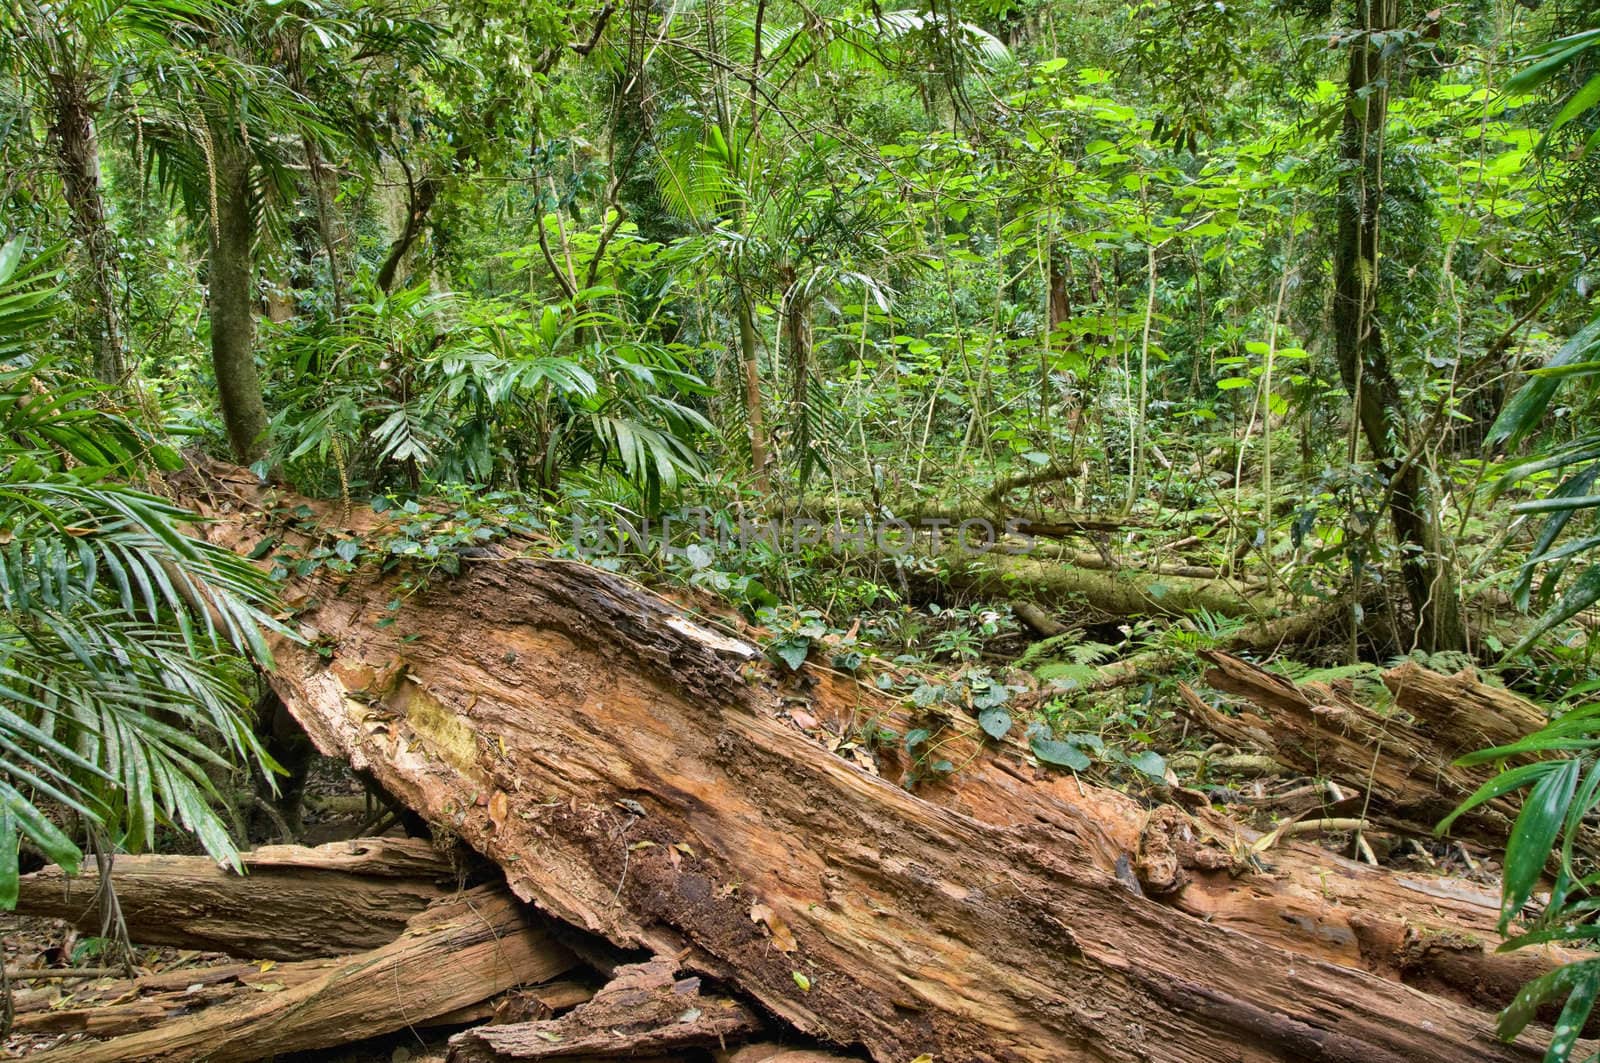 great image of the beauty of the rainforest with fallen log